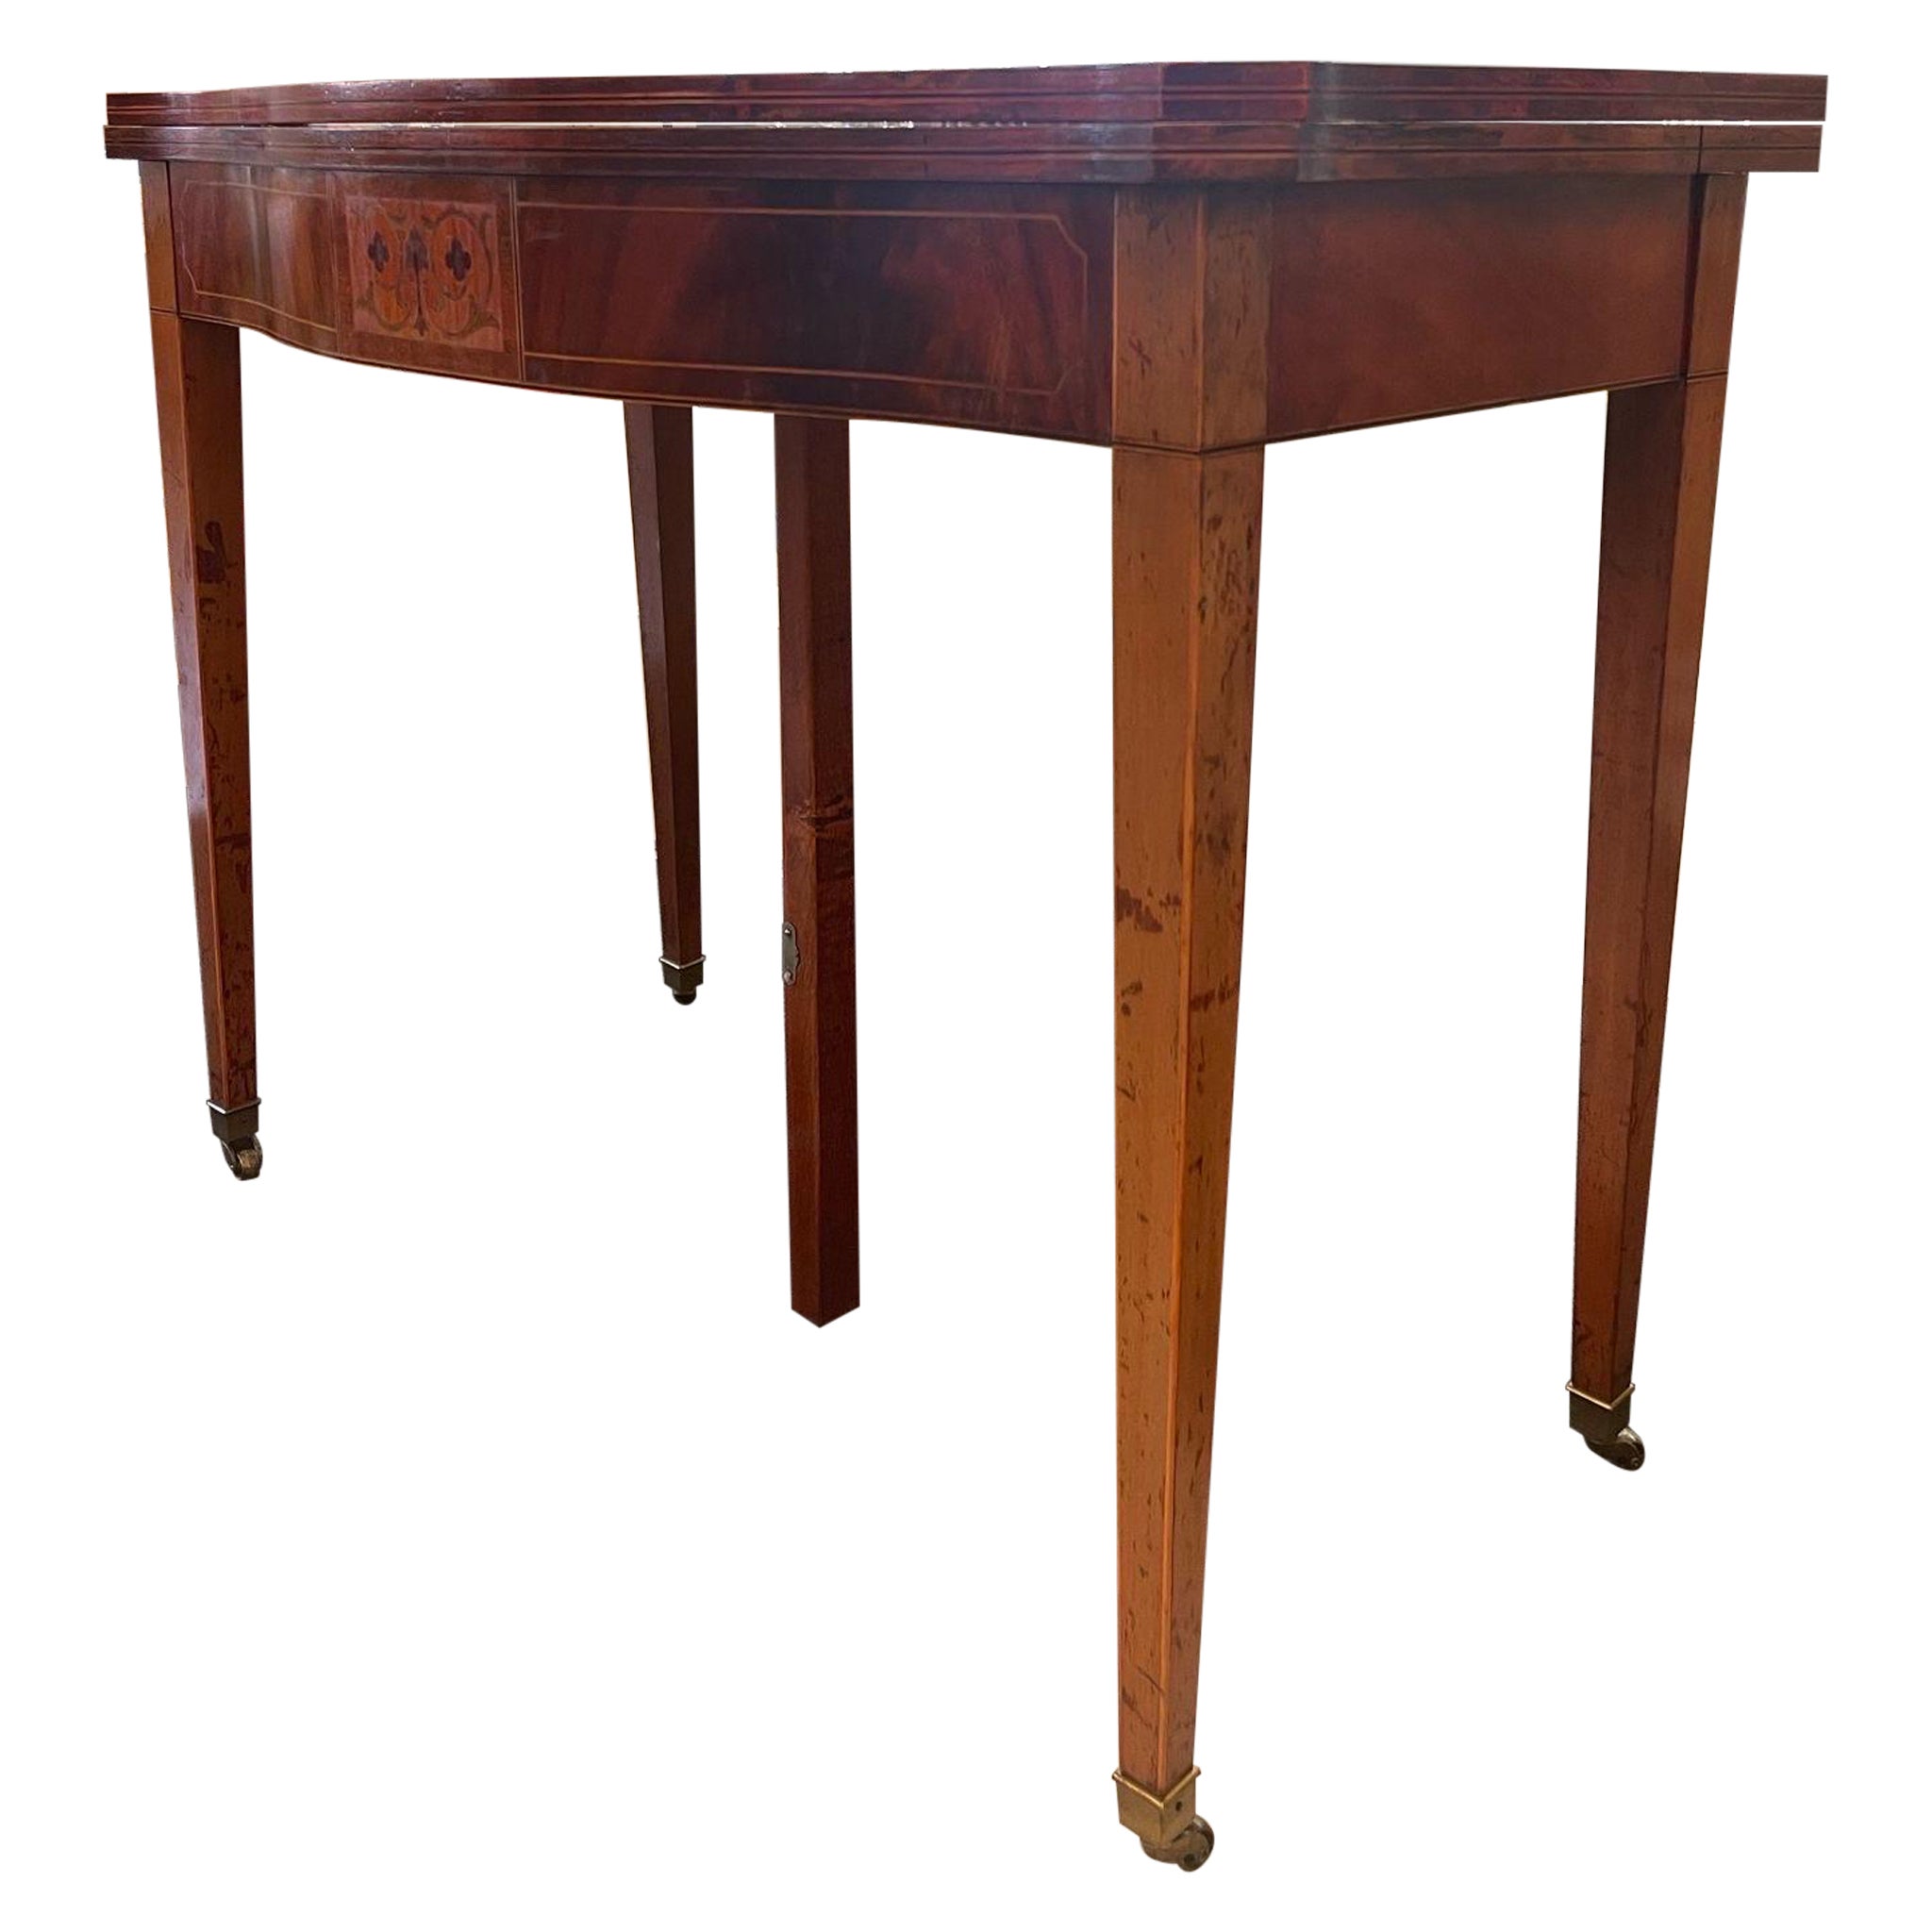 Vintage Wooden Extending Dining Table With Wood Inlay Accents.